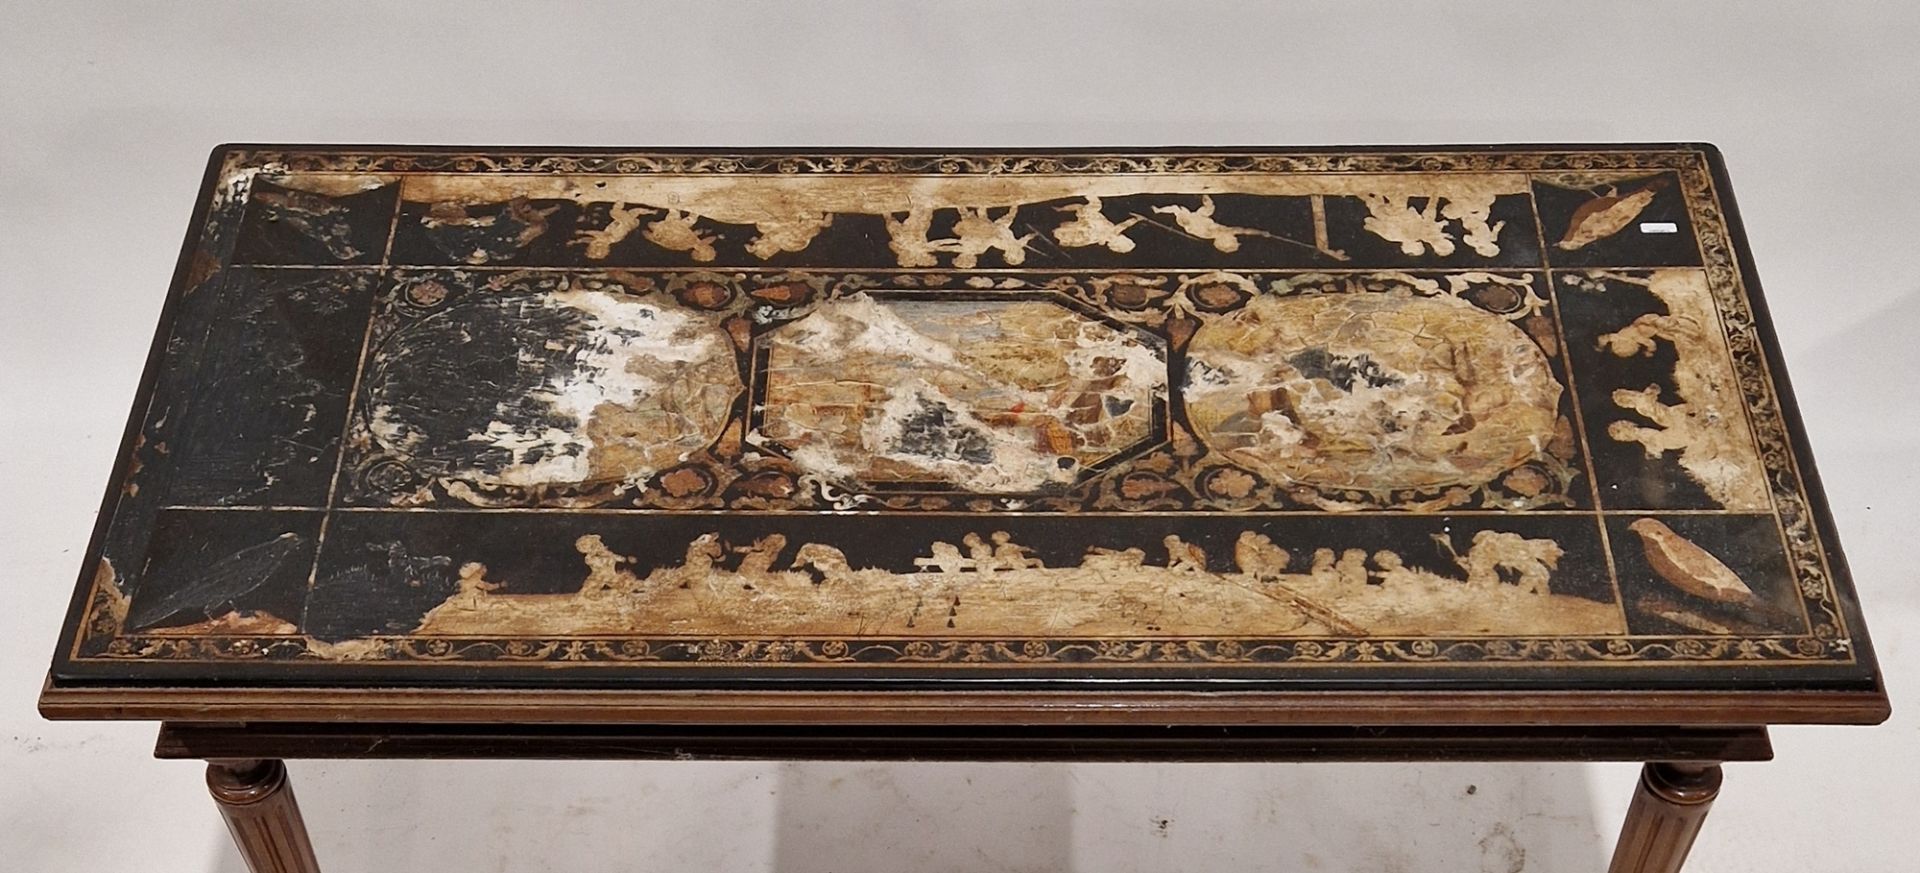 19th century continental marble-topped inlaid coffee table of rectangular form, the top with - Image 2 of 2